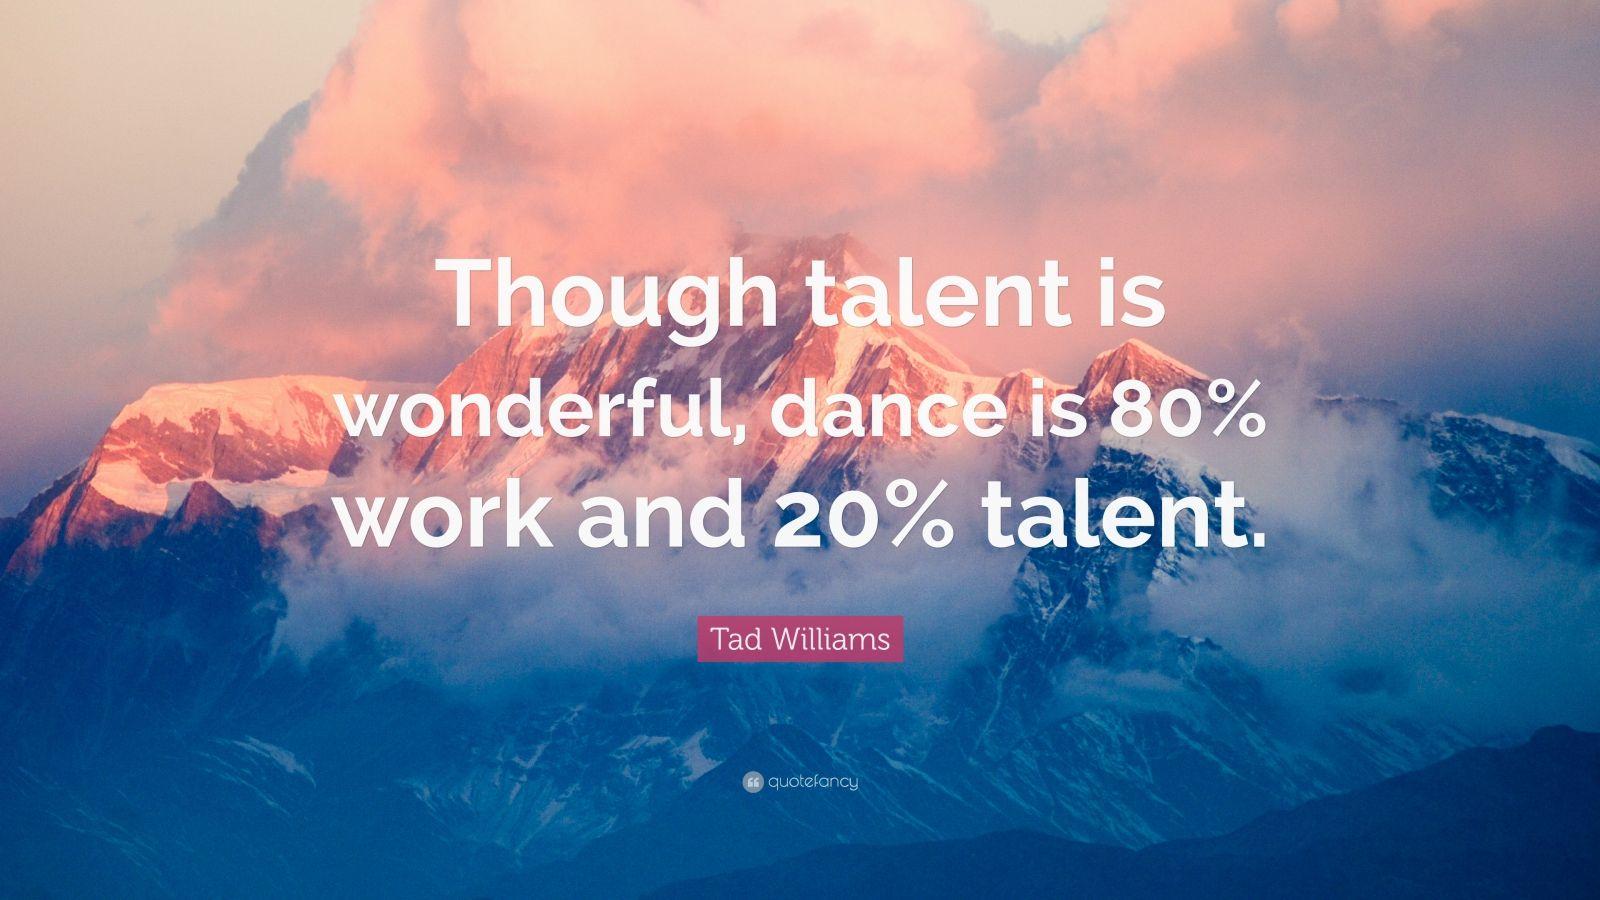 Tad Williams Quote: “Though talent is wonderful, dance is 80